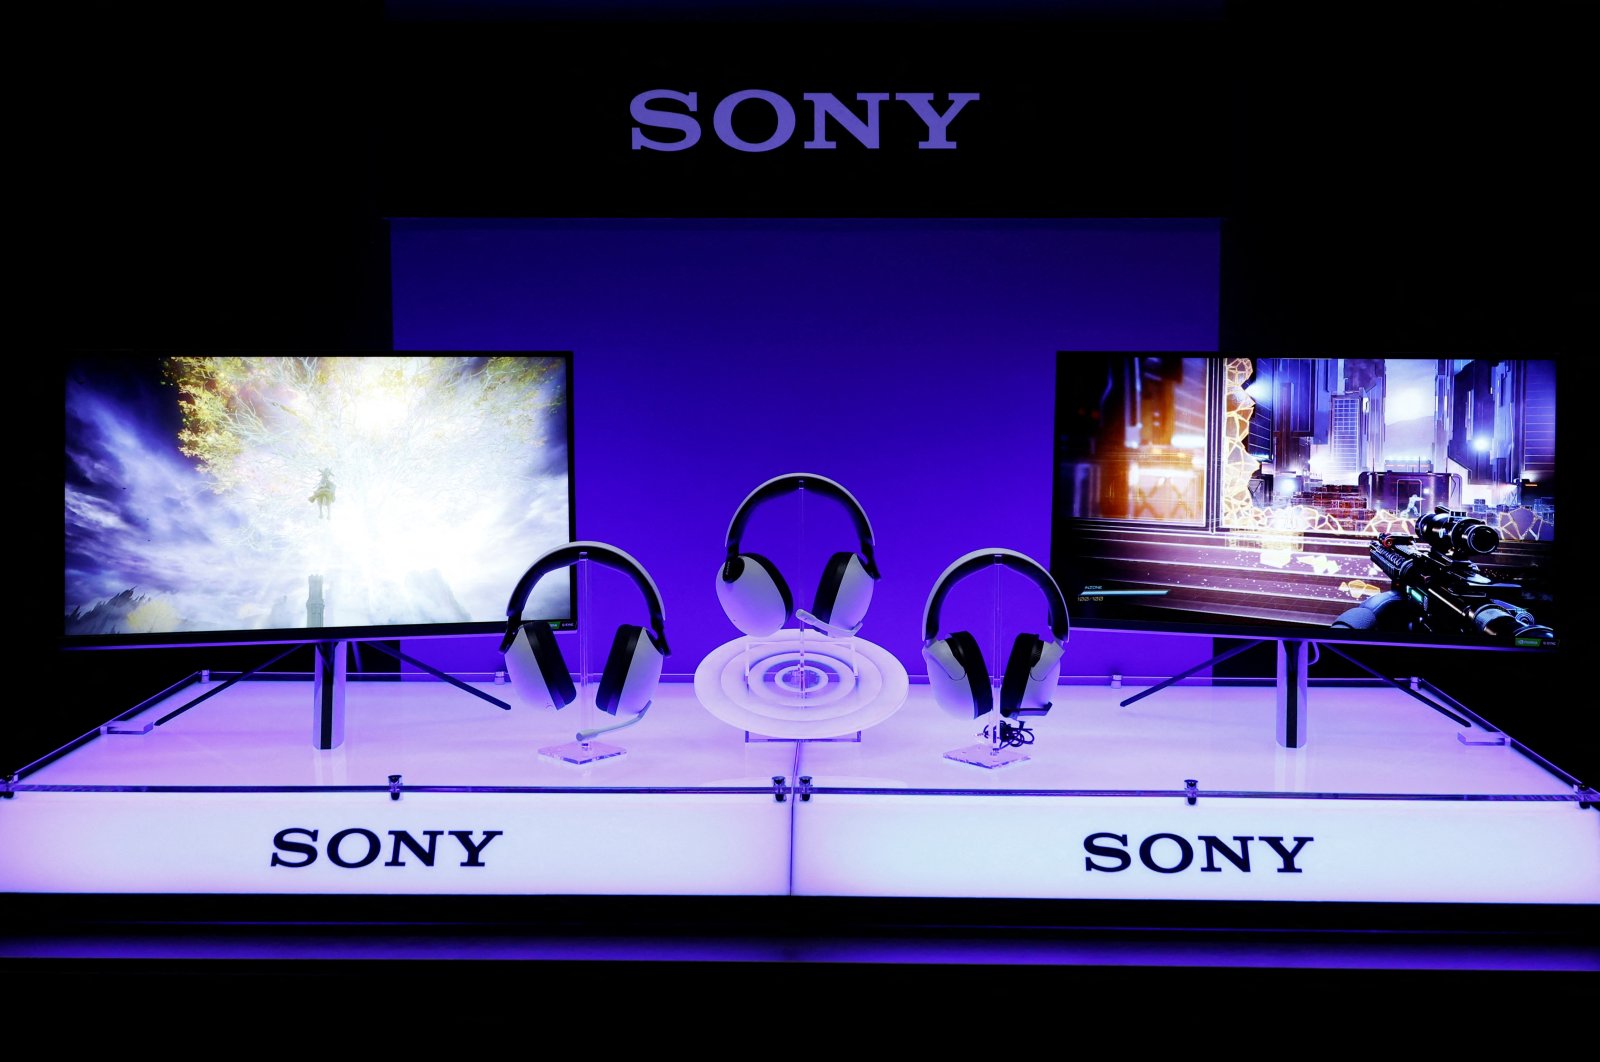 Sony Group&#039;s new line of headphones and monitors targeting the growing PC market for video games, the Inzone line, is displayed during its unveiling in Tokyo, Japan, June 29, 2022. (Reuters Photo)